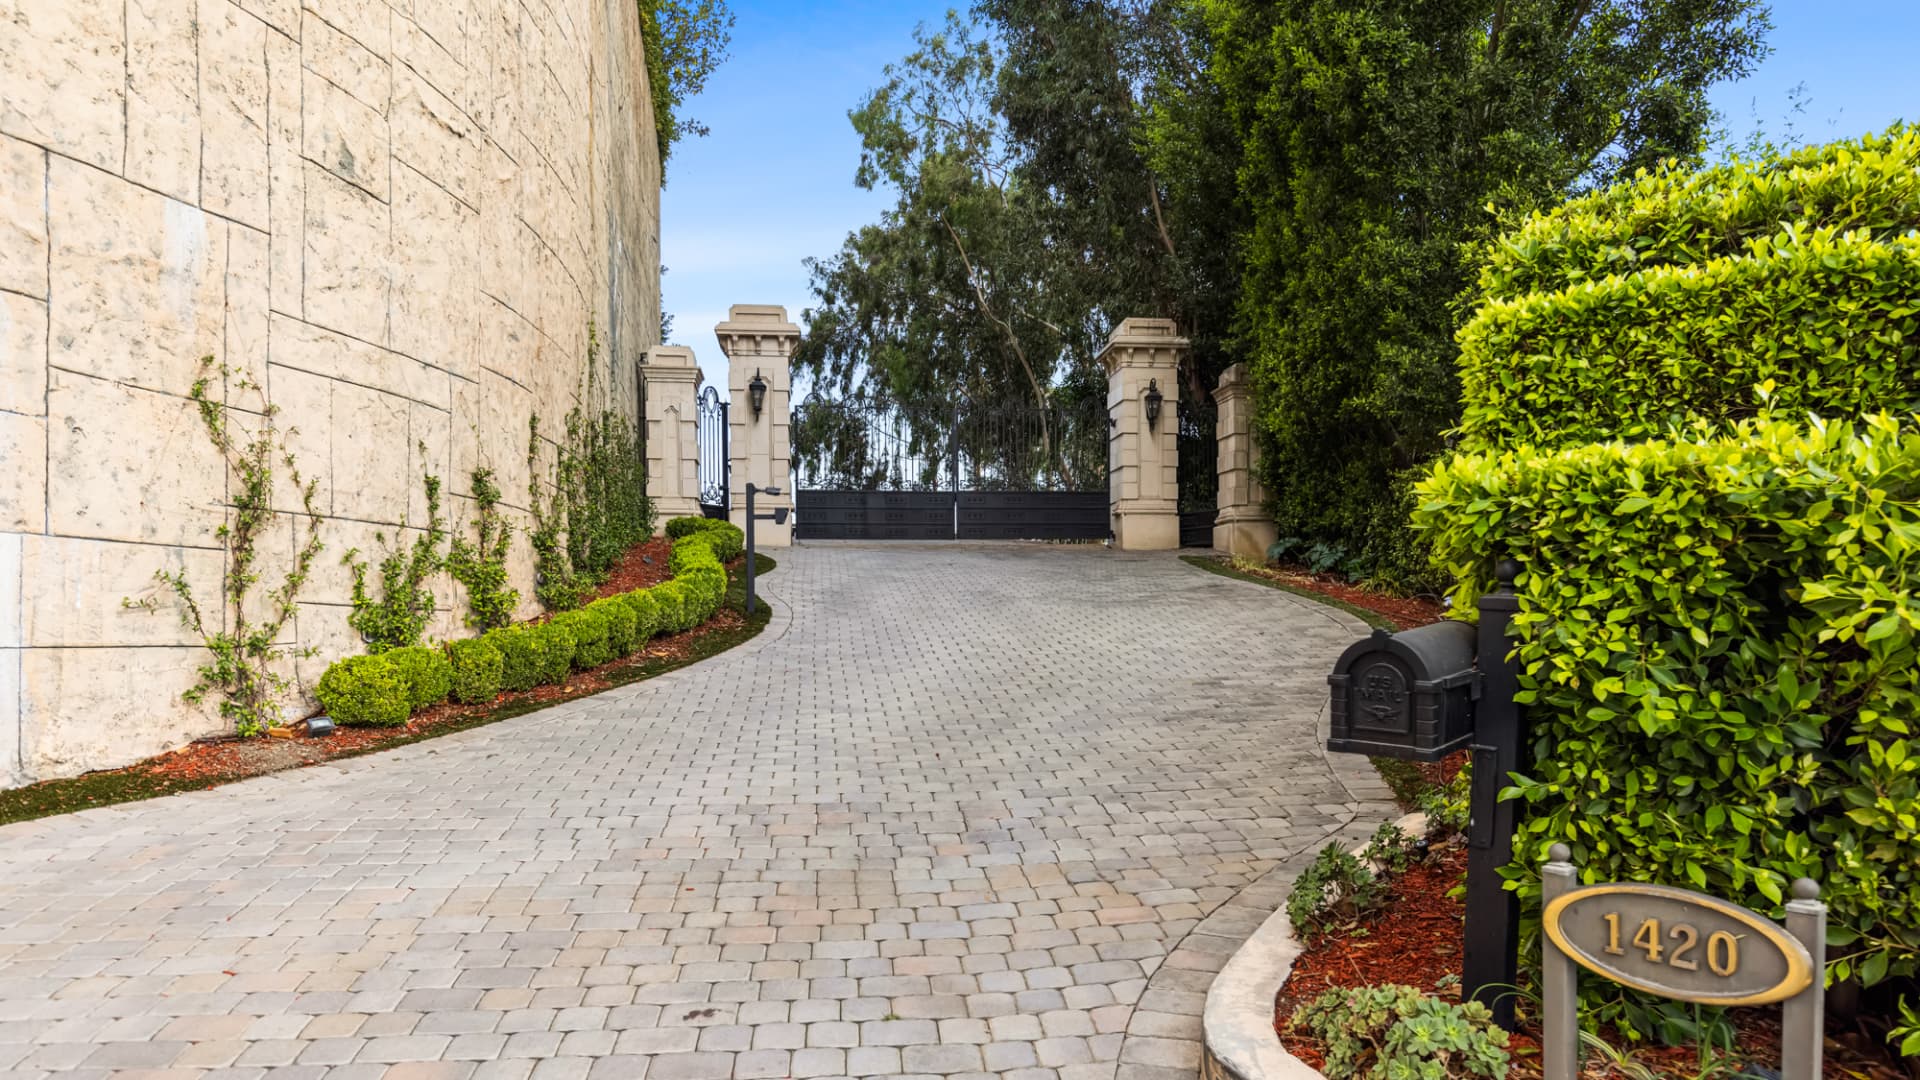 Private drive leading to the main residence at 1420 Davies Dr in Beverly Hills.